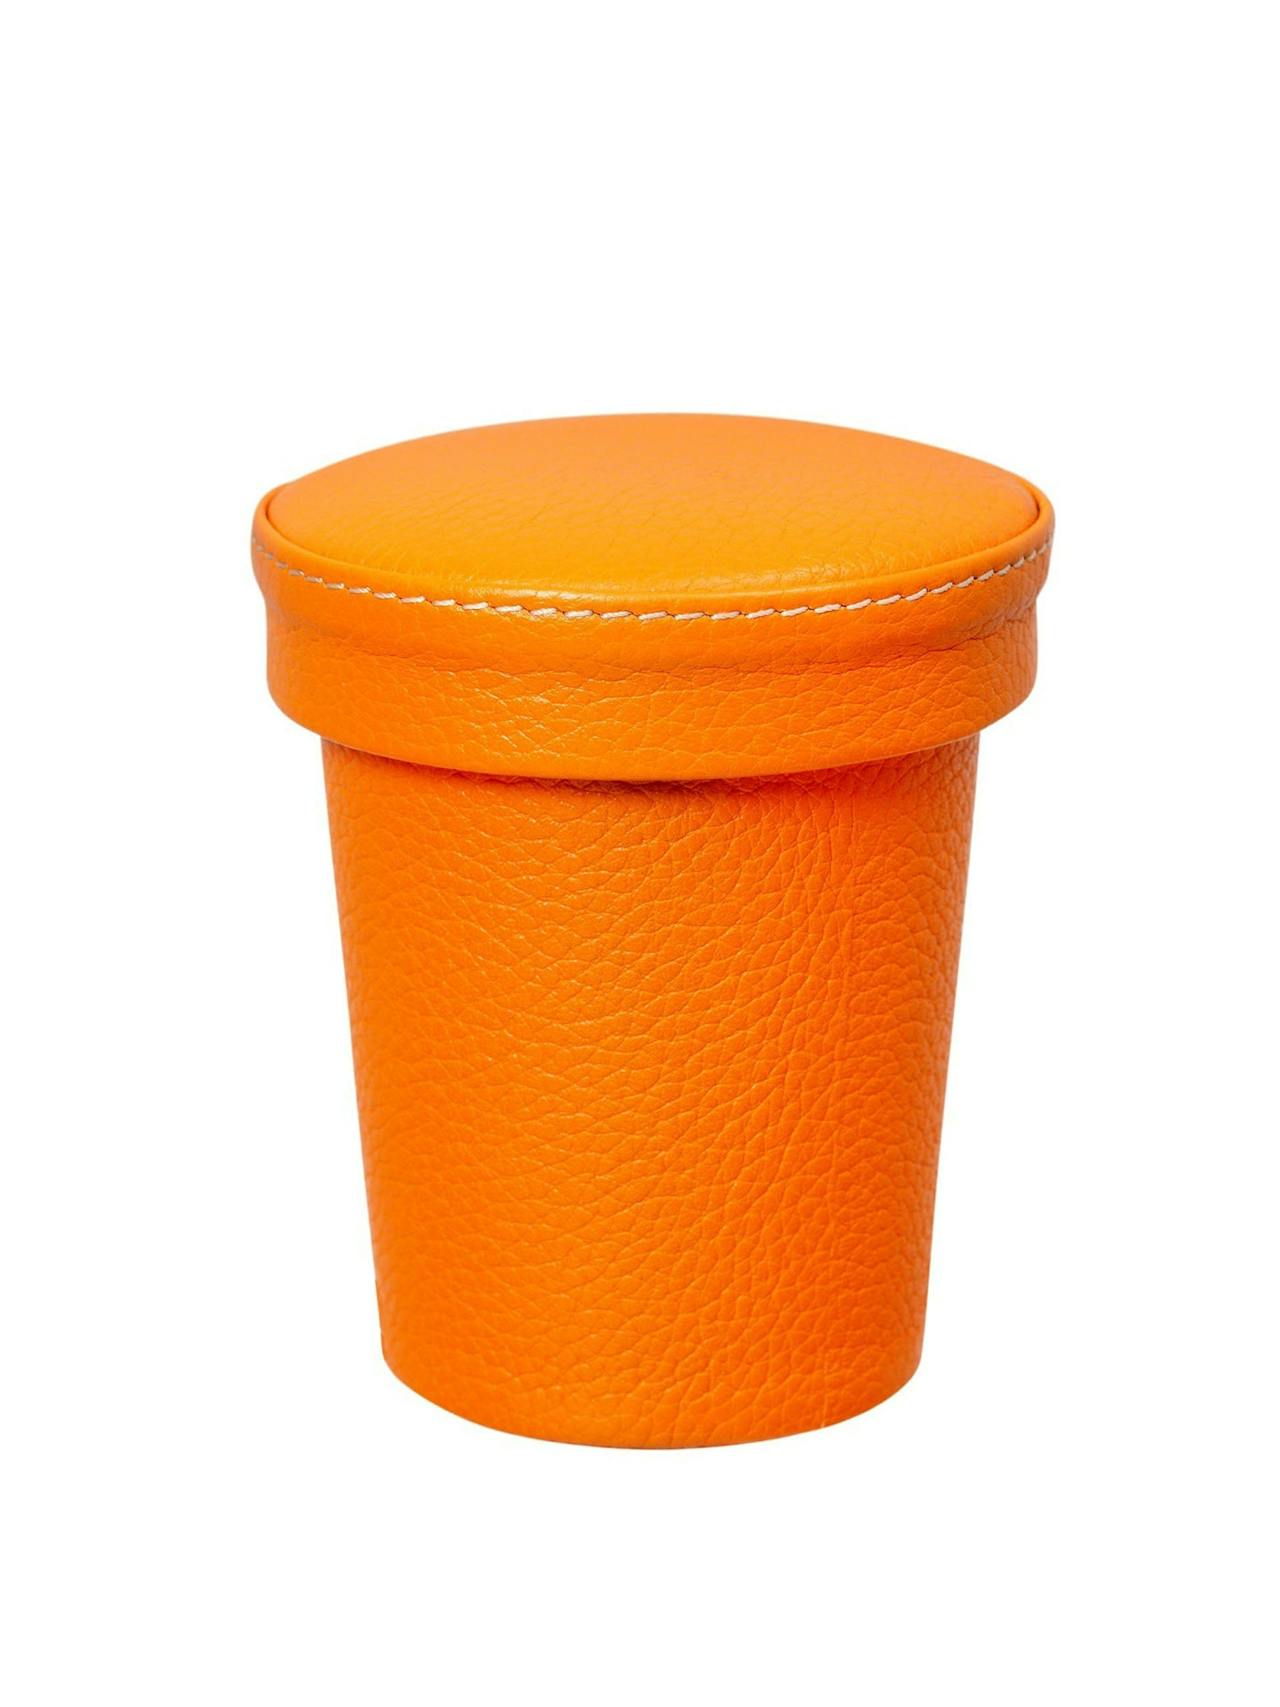 Chelsea leather dice cup in tangerine